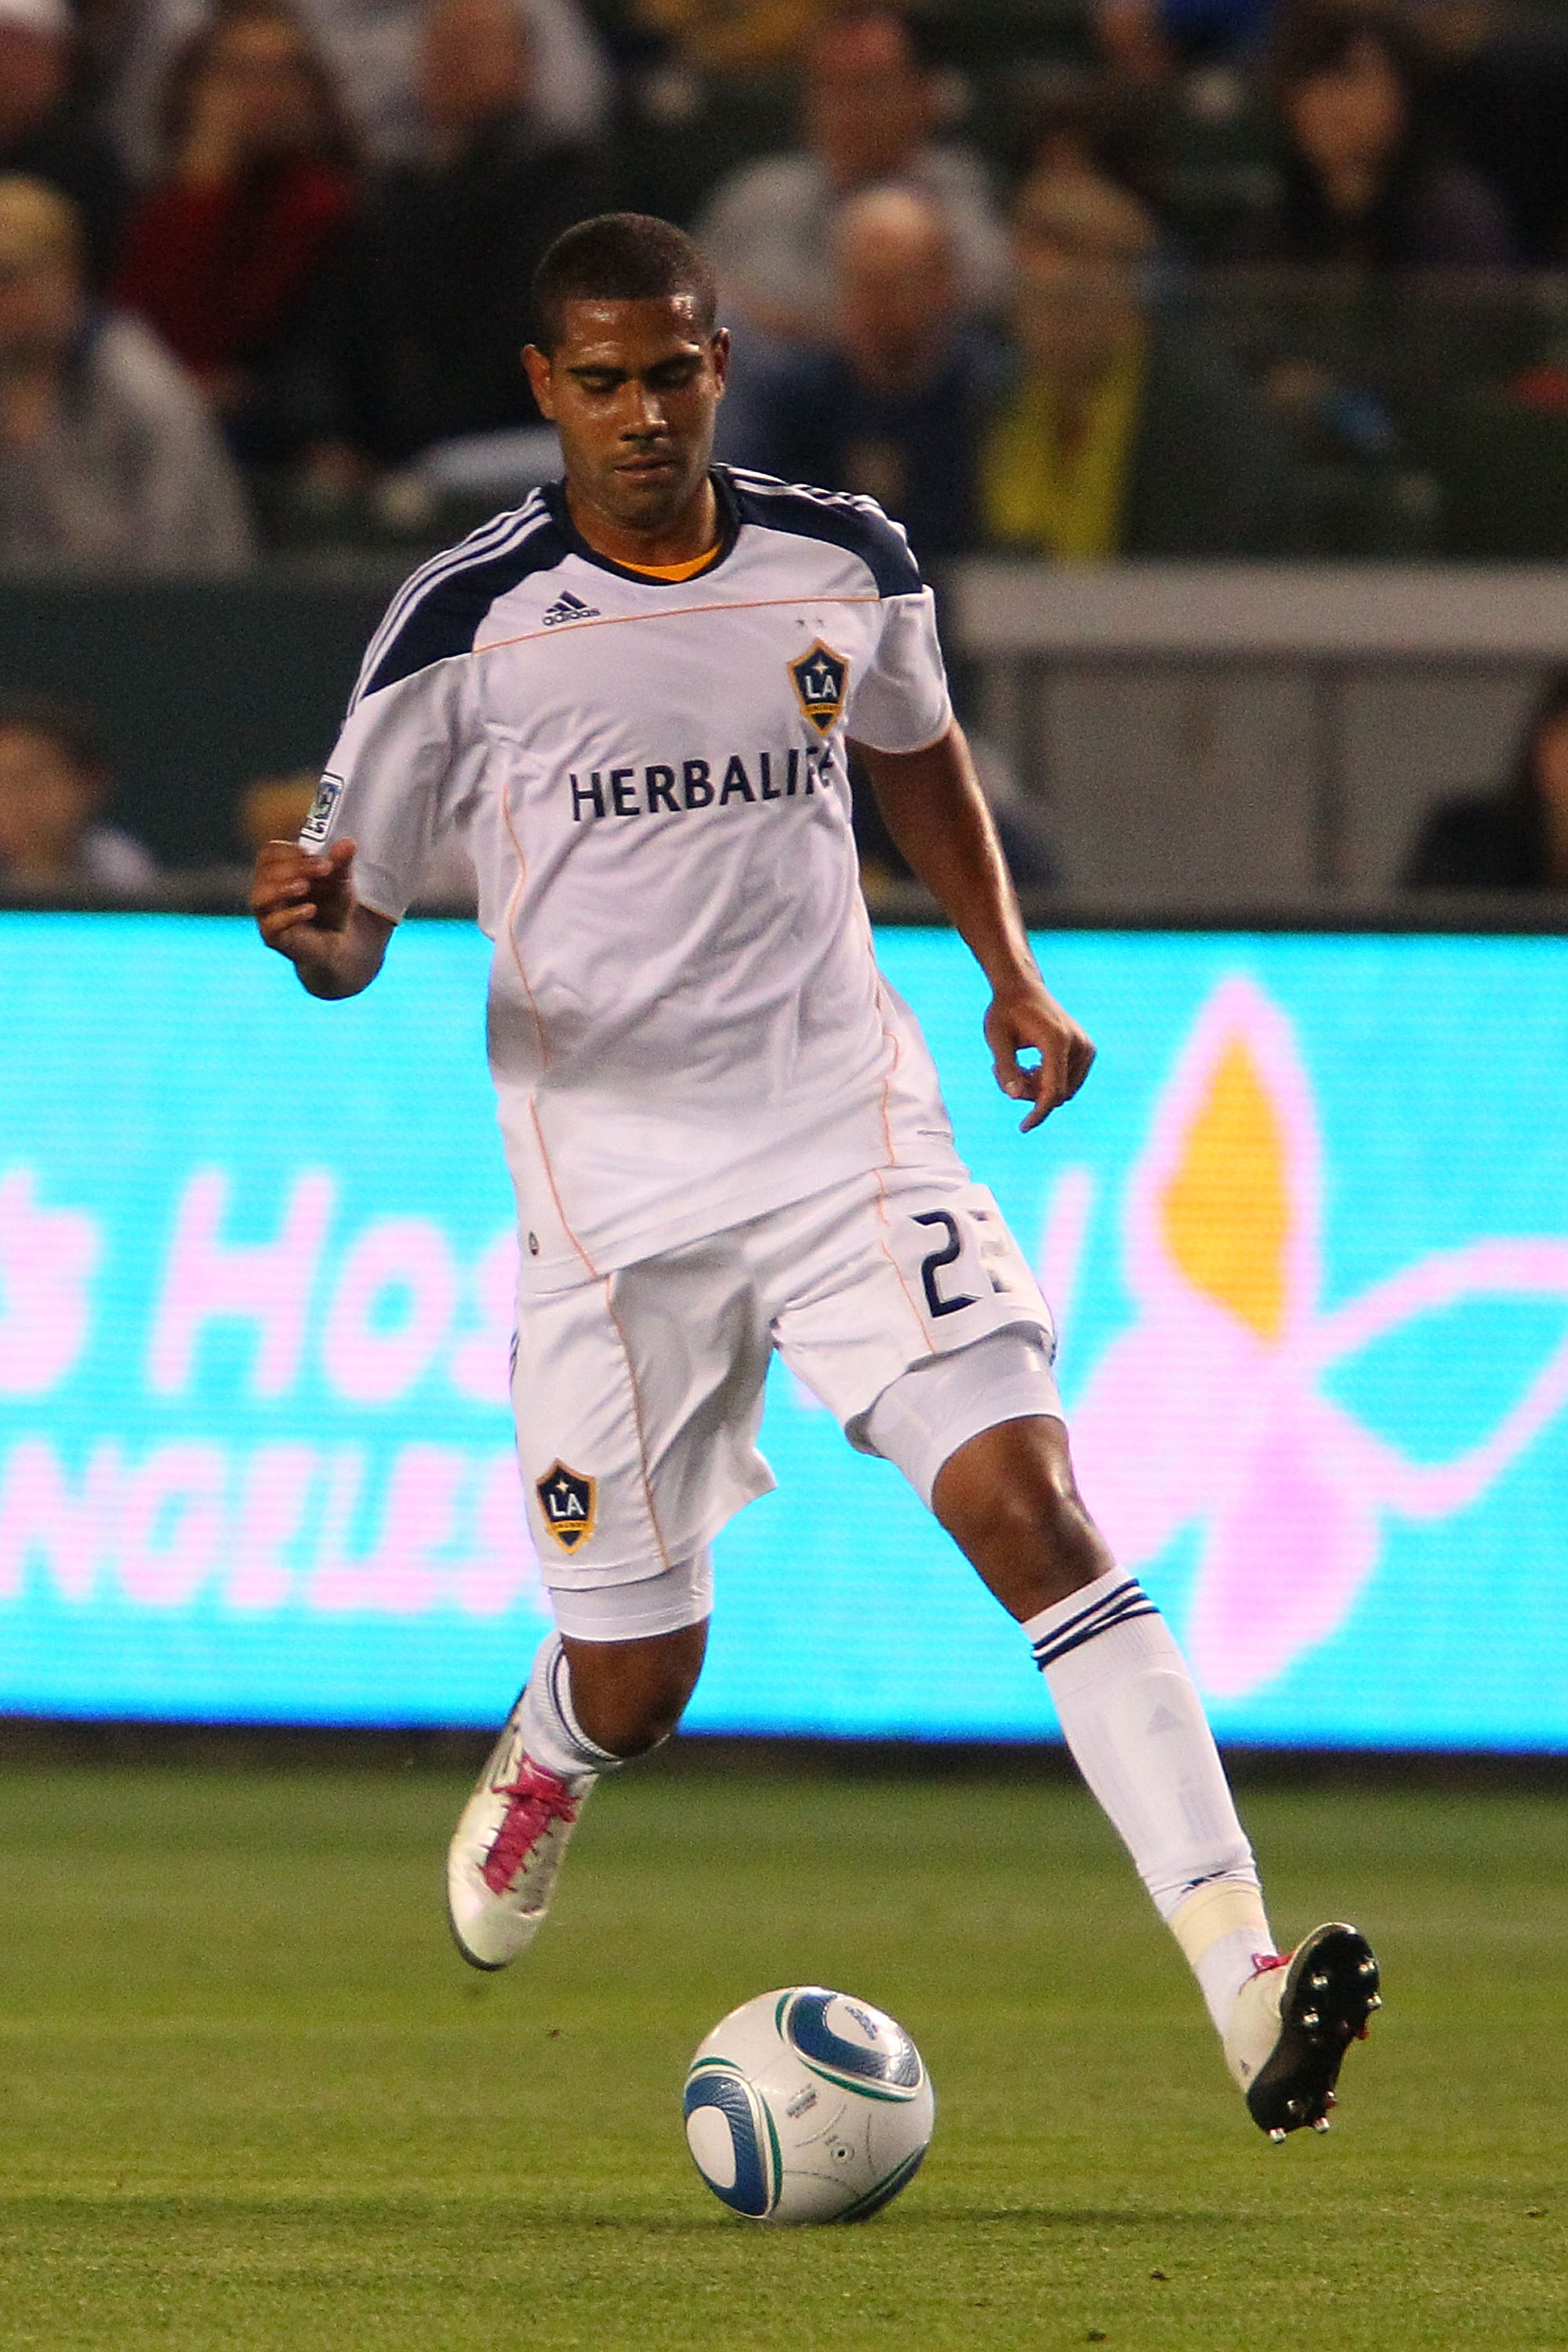 CARSON, CA - APRIL 02:  Leonardo #22 of the Los Angeles Galaxy controls the ball  against the Philadelphia Union during the match at The Home Depot Center on April 2, 2011 in Carson, California.  (Photo by Joe Scarnici/Getty Images)